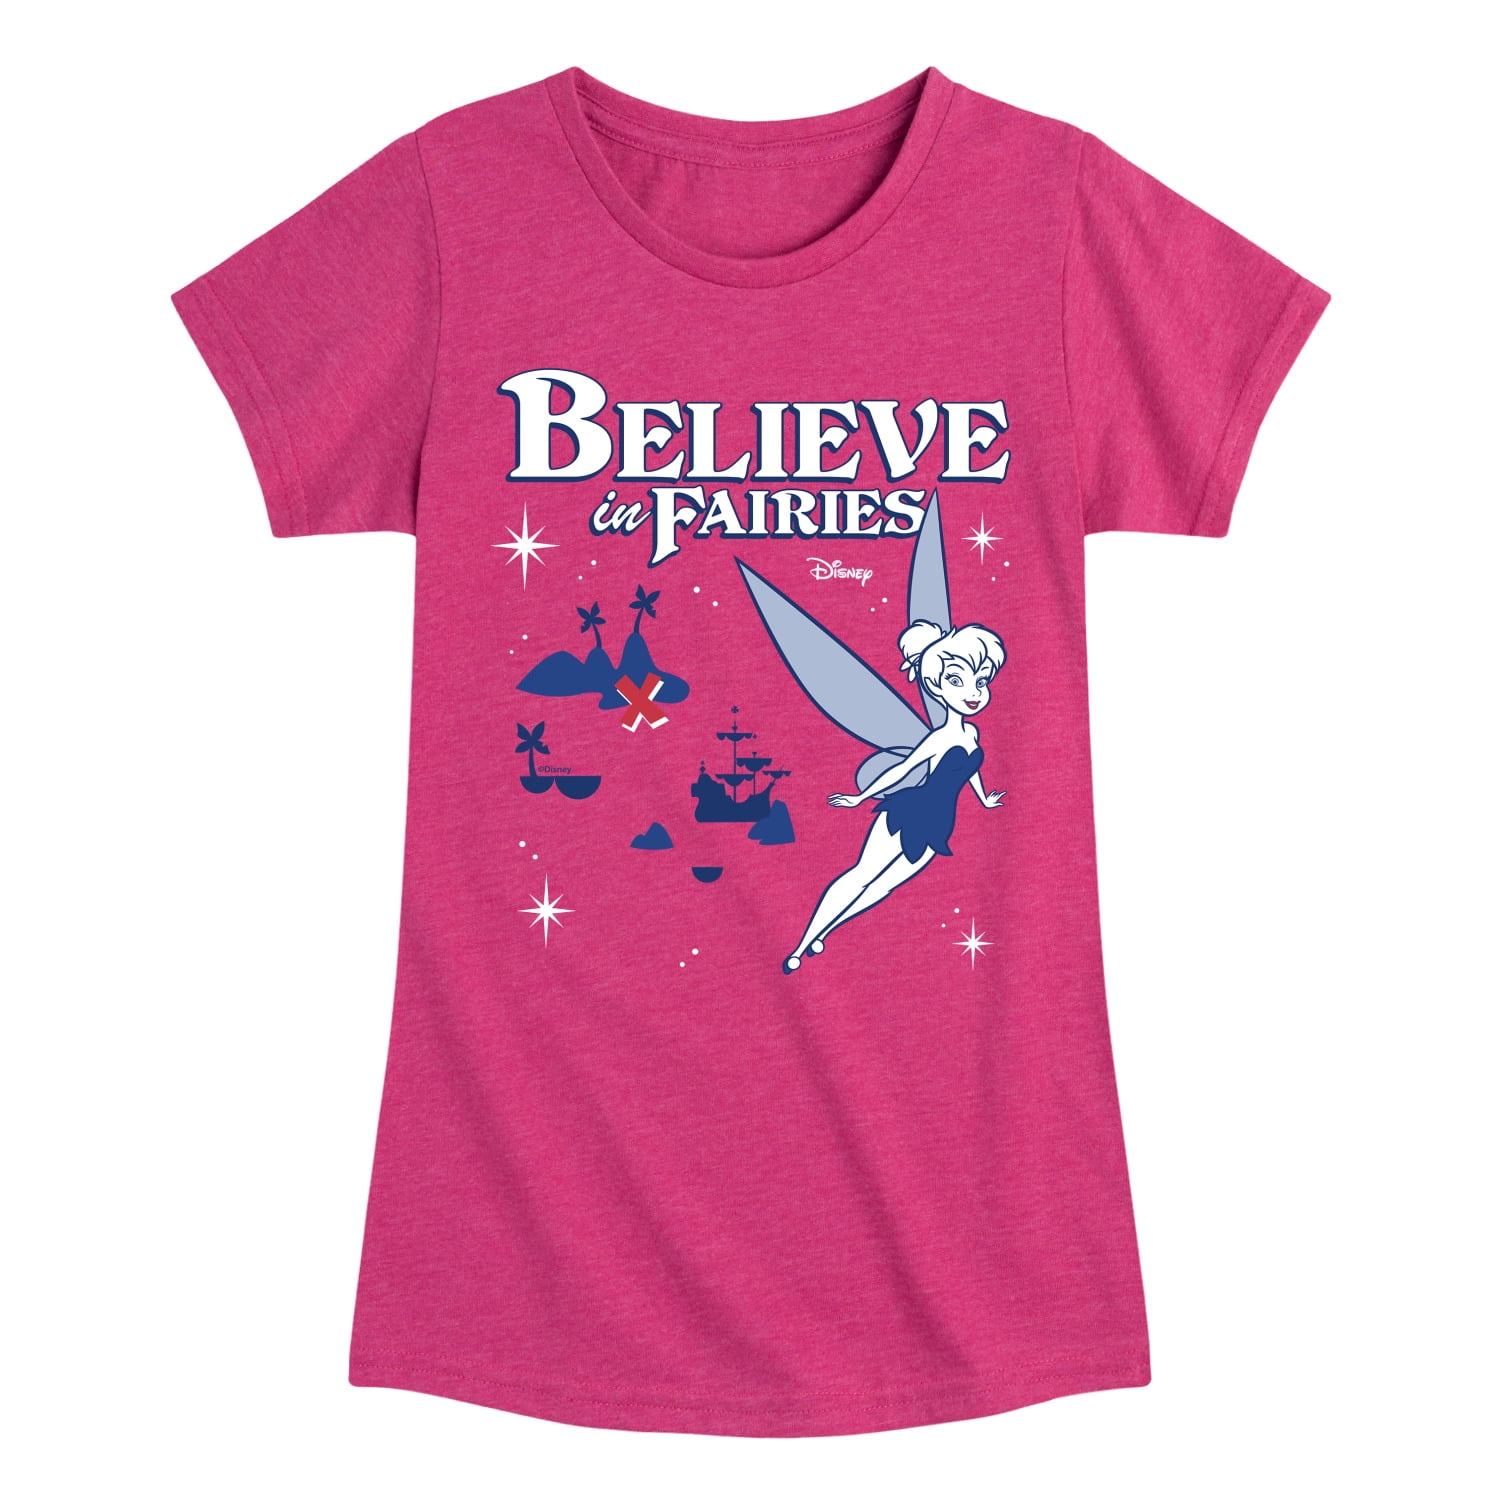 Toddler Short Peter And - Pan - Youth - T-Shirt Disney in Tinkerbell Fairies Sleeve Girls Graphic - Believe